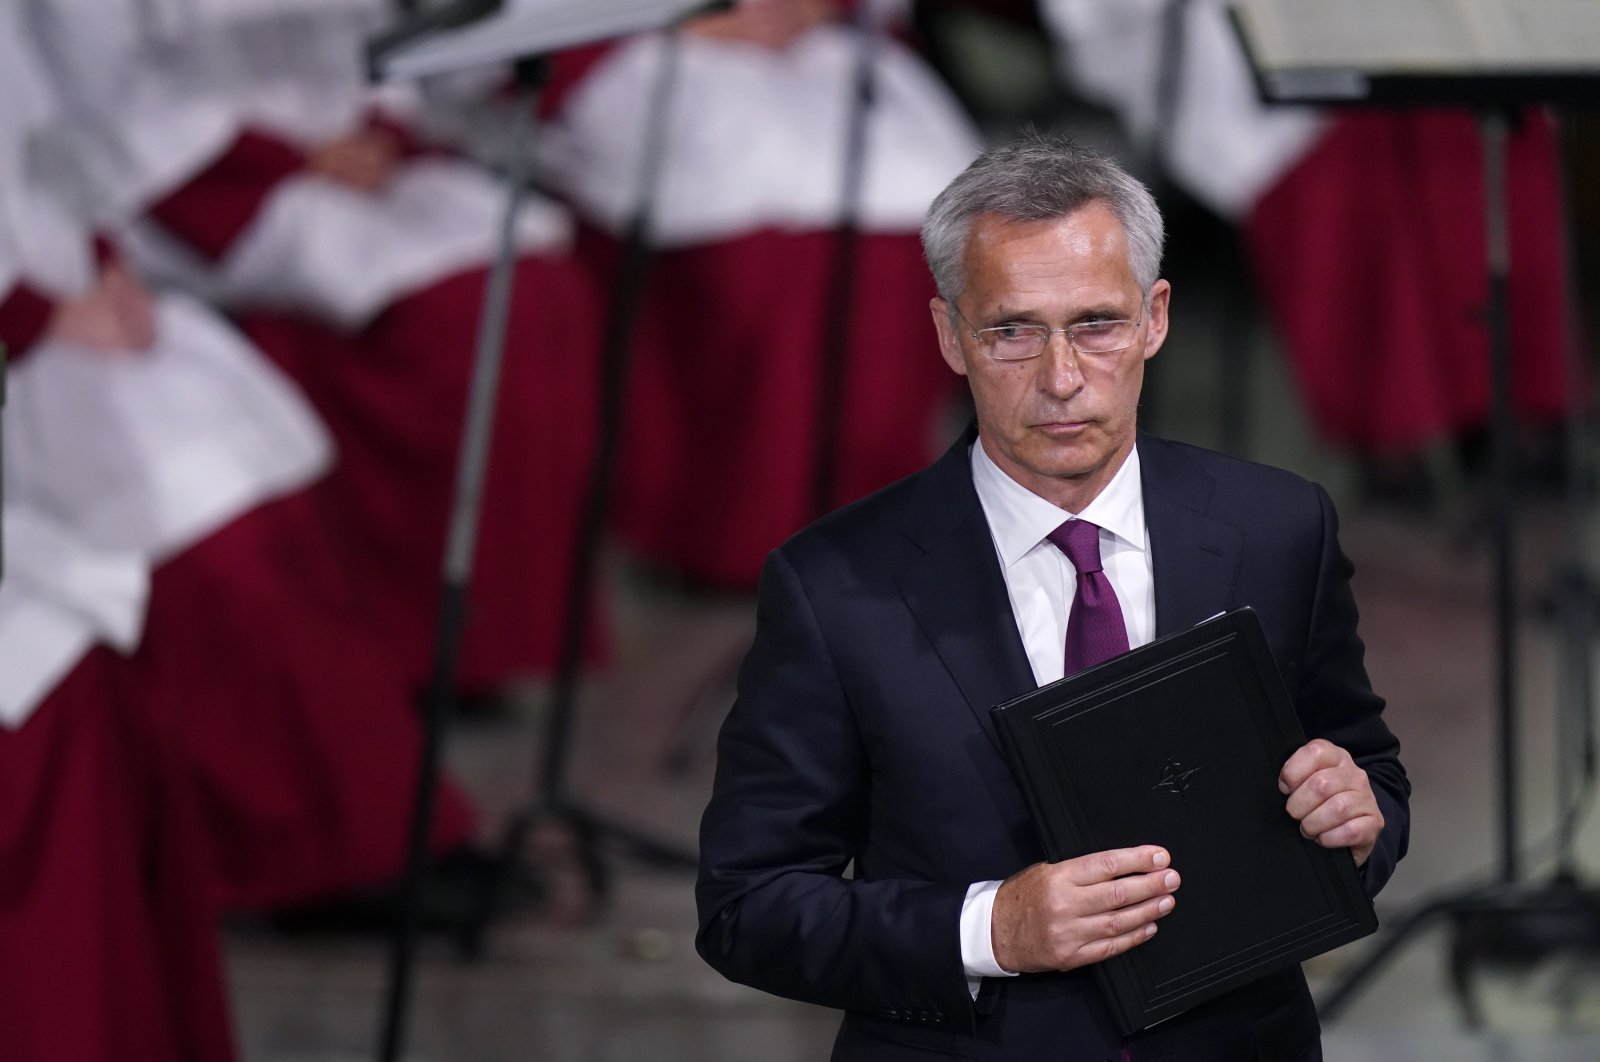 NATO Secretary-General Jens Stoltenberg looks on after delivering his speech during the memorial service at Oslo Cathedral, on the 10-year anniversary of the terrorist attack by Anders Breivik, in Oslo, Norway, July 22, 2021. (NTB scanpix via AP)